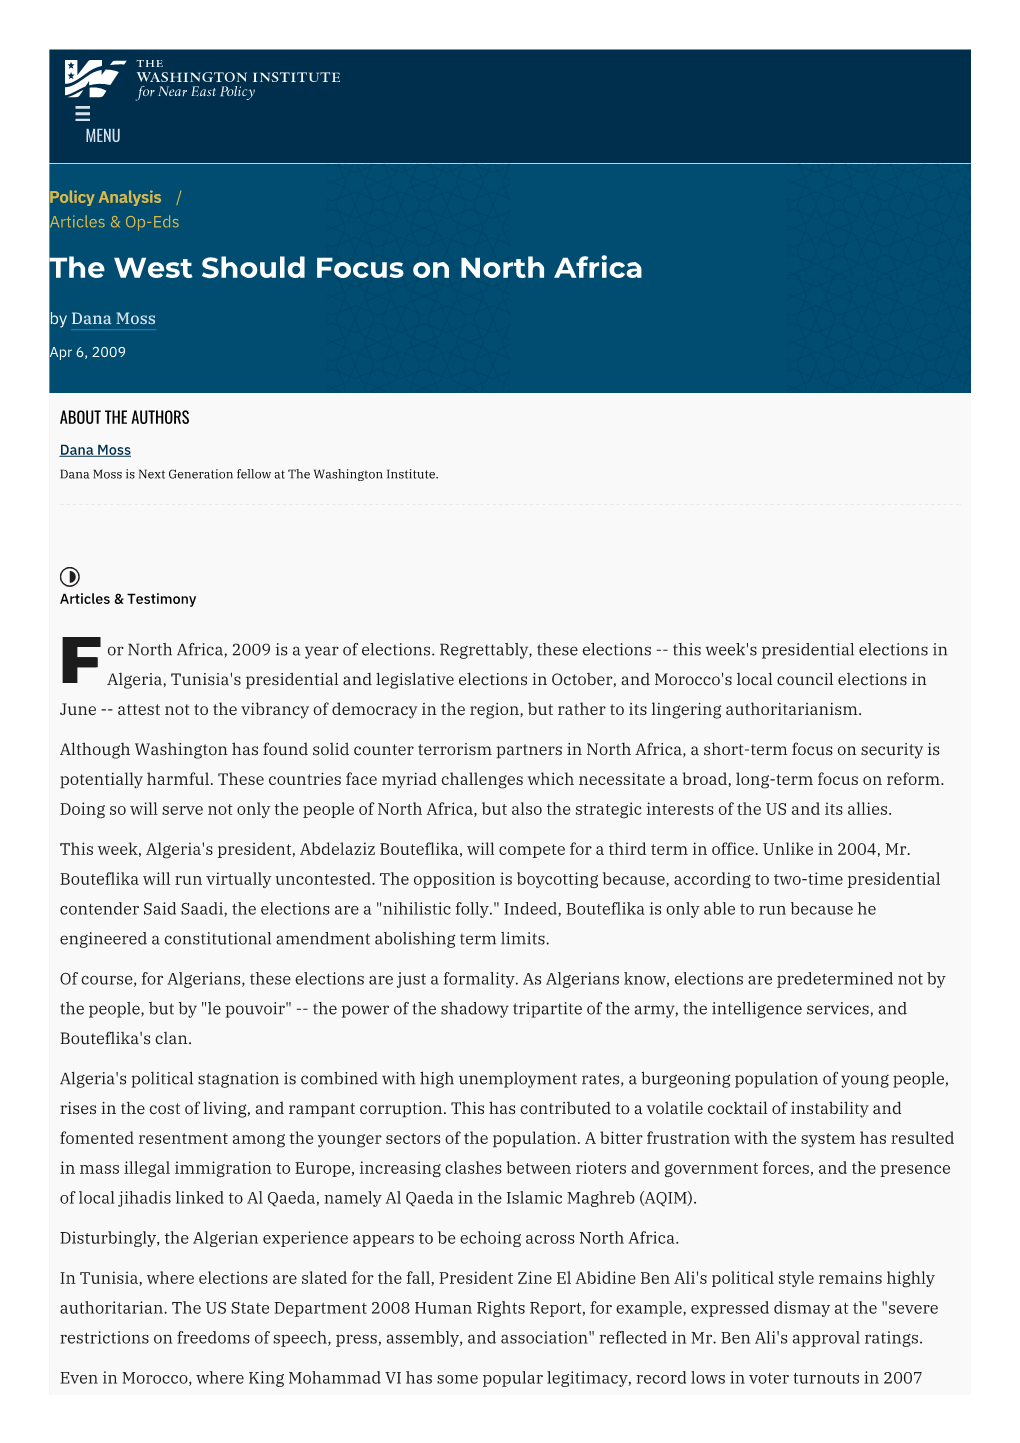 The West Should Focus on North Africa | the Washington Institute